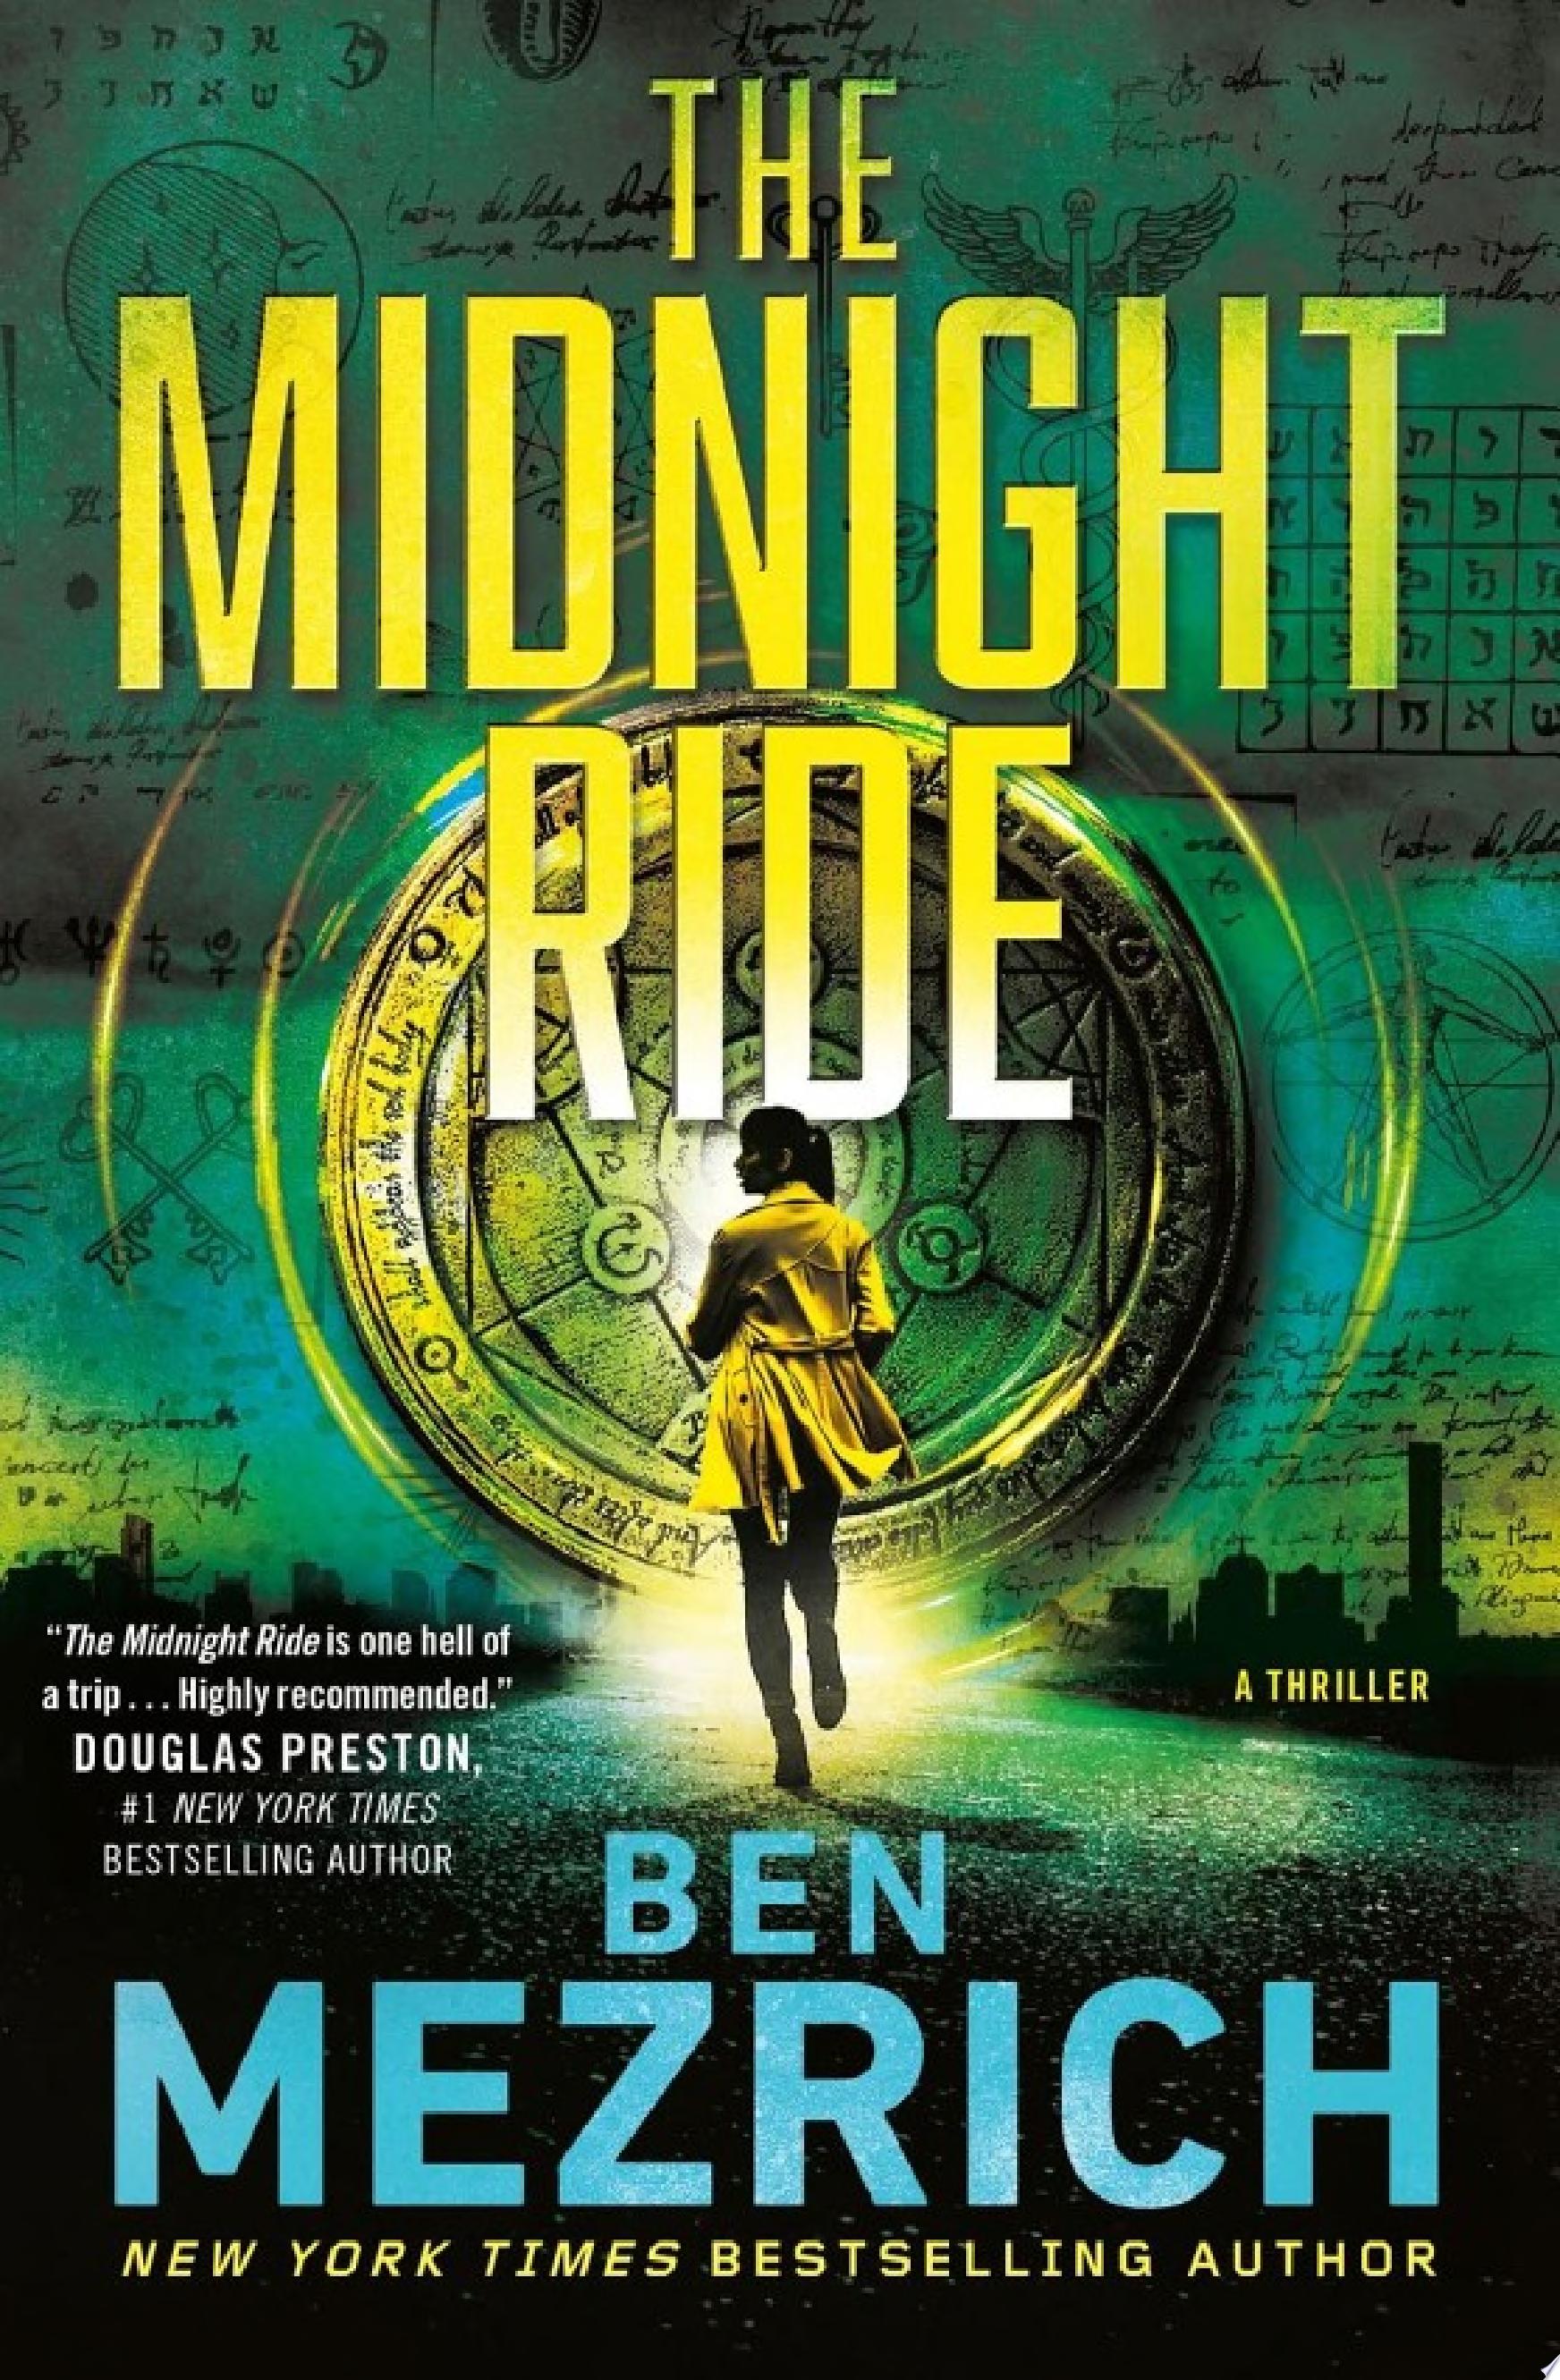 Image for "The Midnight Ride"